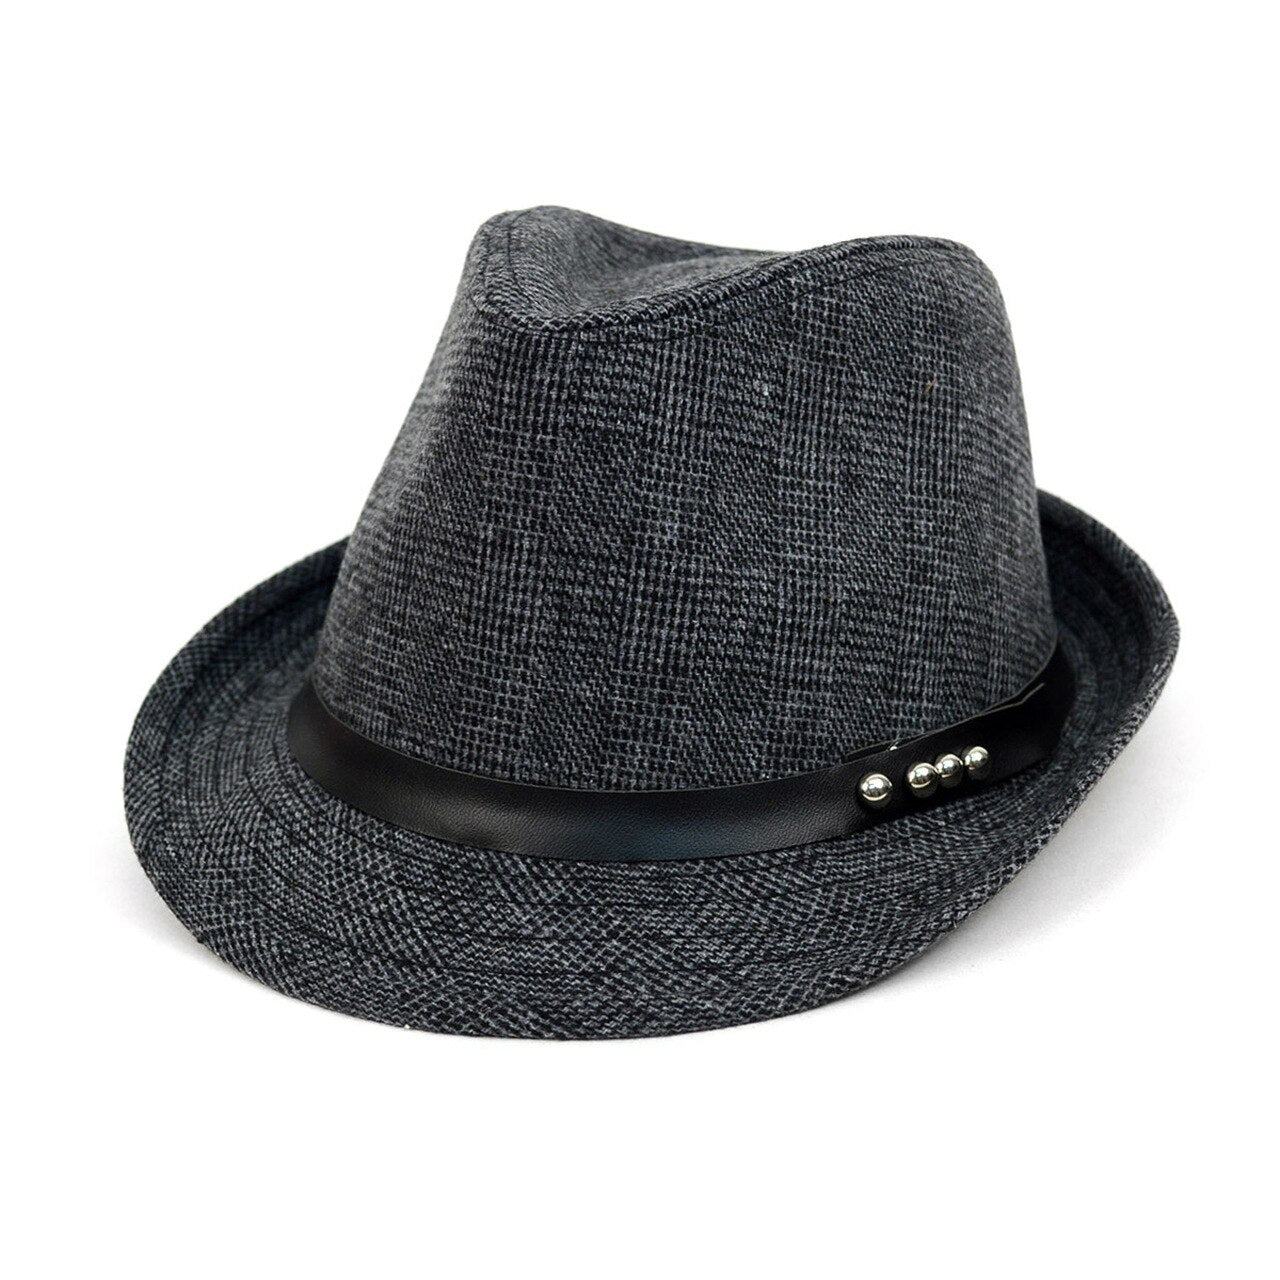 Men’s Fedora Hat-H1805024 - Church Suits For Less